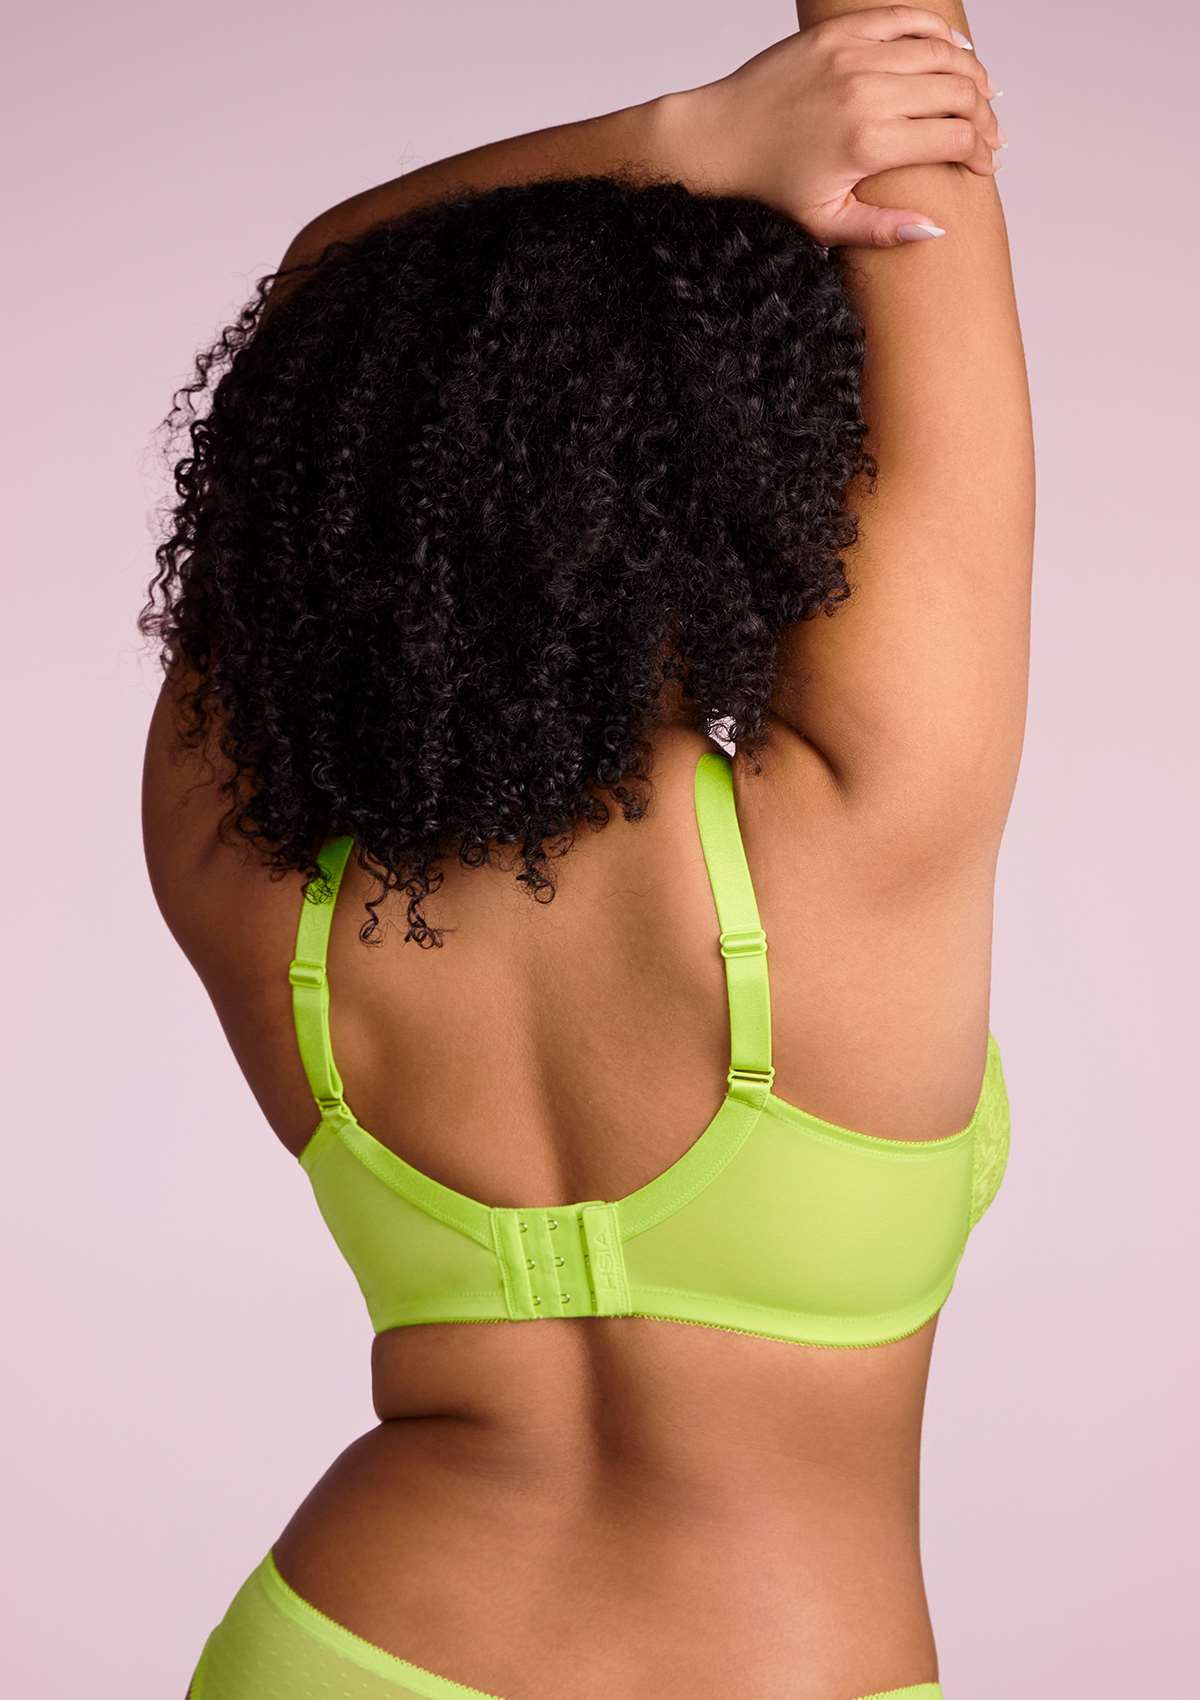 HSIA Enchante Full Cup Minimizing Bra: Supportive Unlined Lace Bra - Lime Green / 44 / DD/E